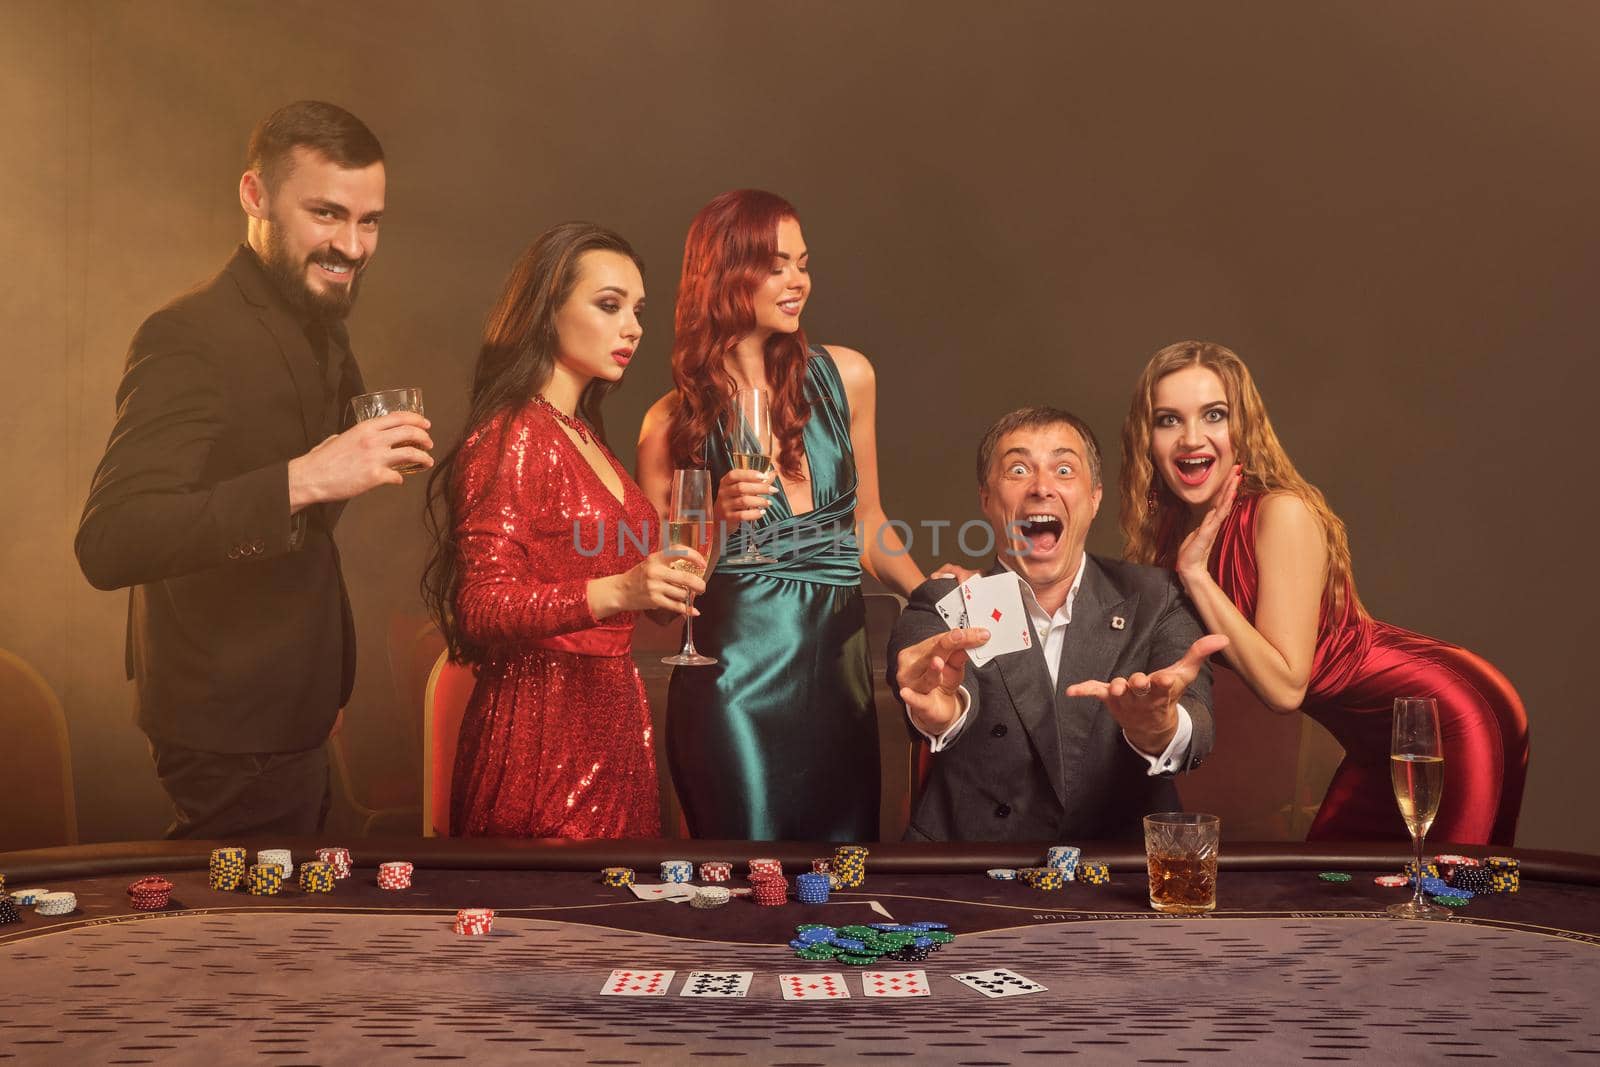 Enthusiastic partners are playing poker at casino. They are celebrating their win, smiling and looking vey excited while posing at the table against a dark smoke background in a ray of a spotlight. Cards, chips, money, alcohol, gambling, entertainment concept.